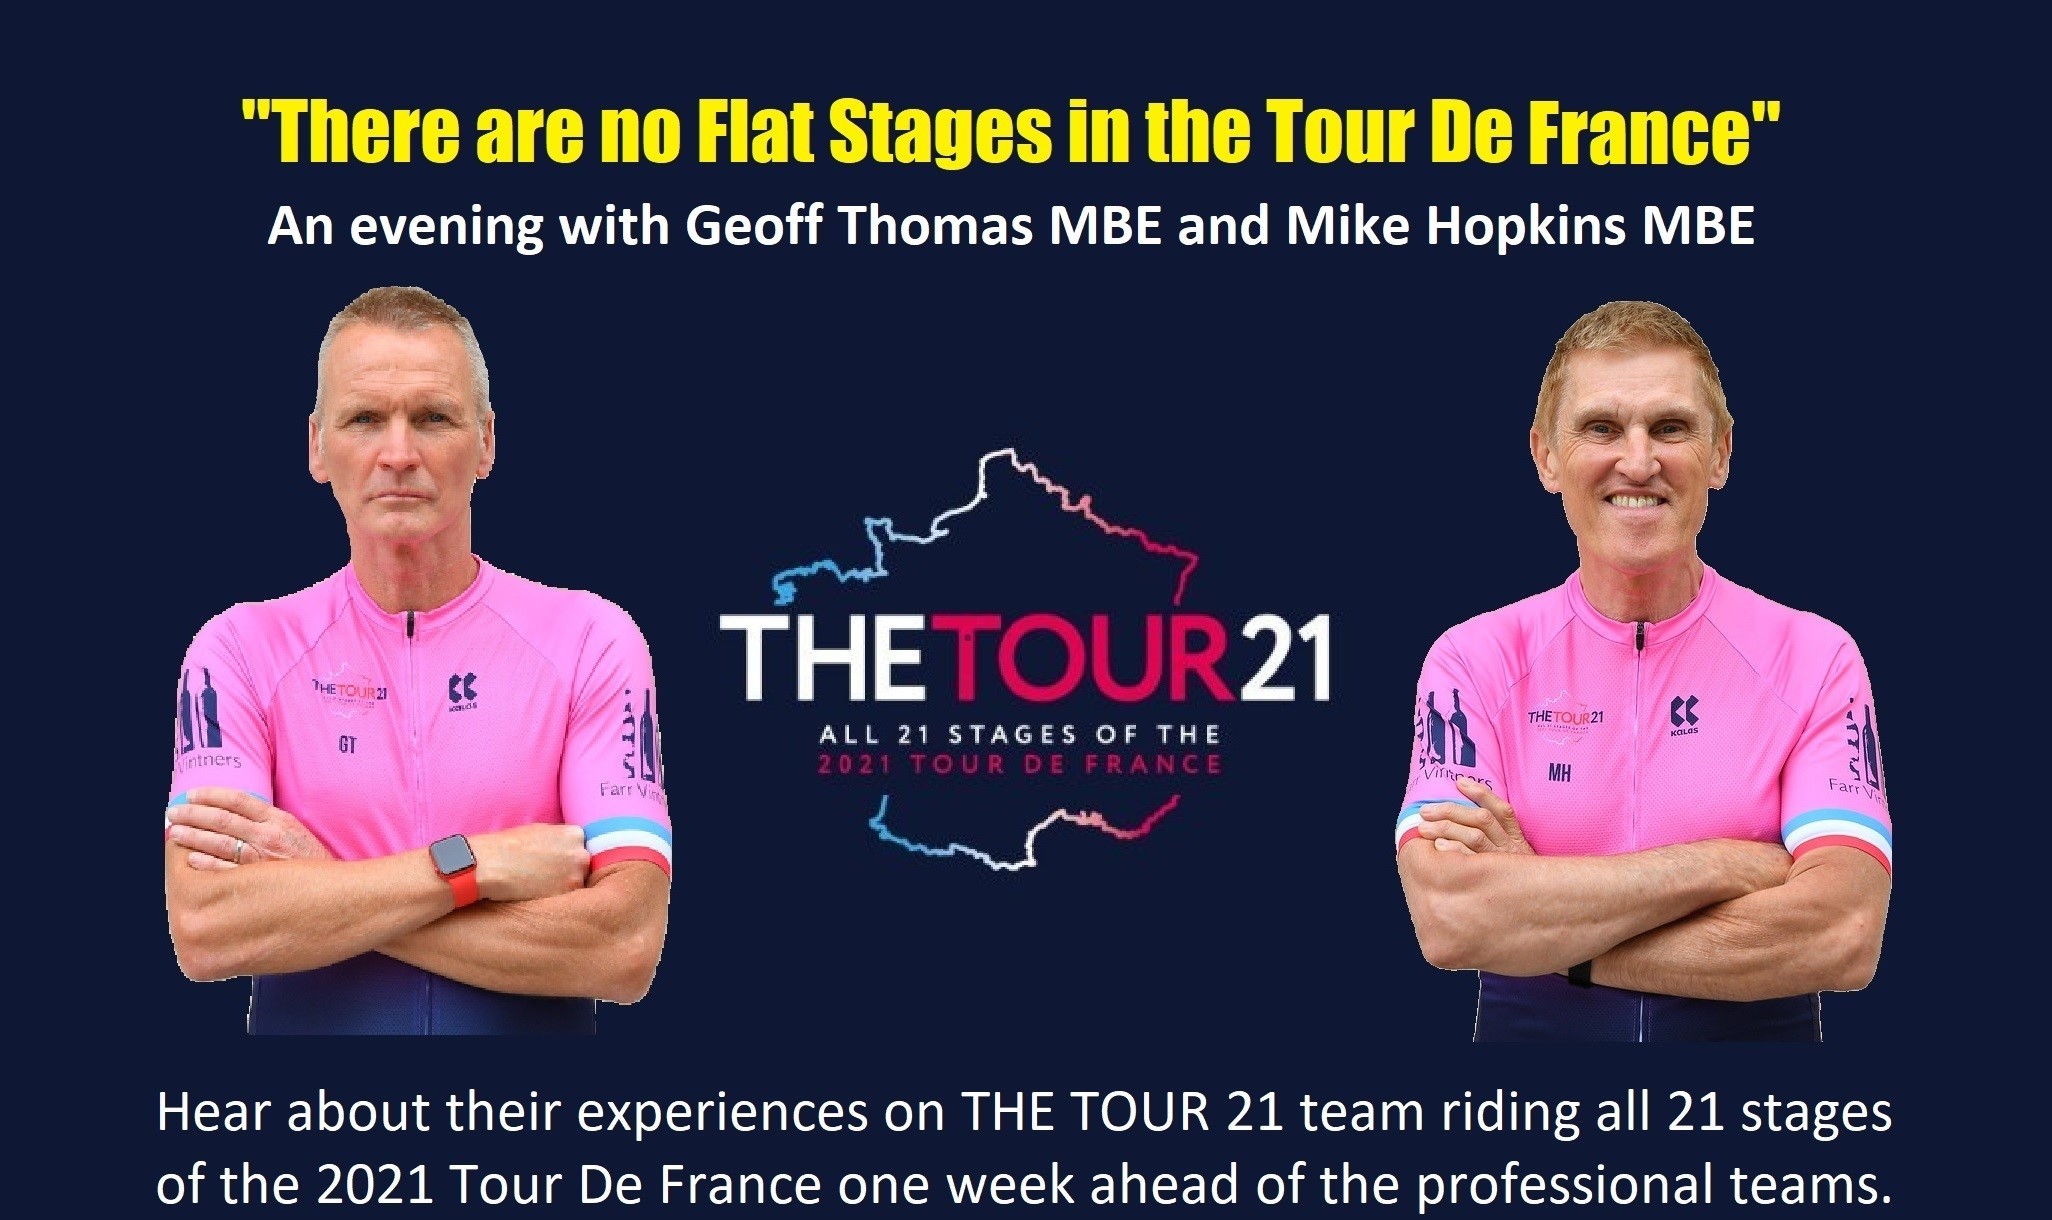 There are No Flat Stages on the Tour De France